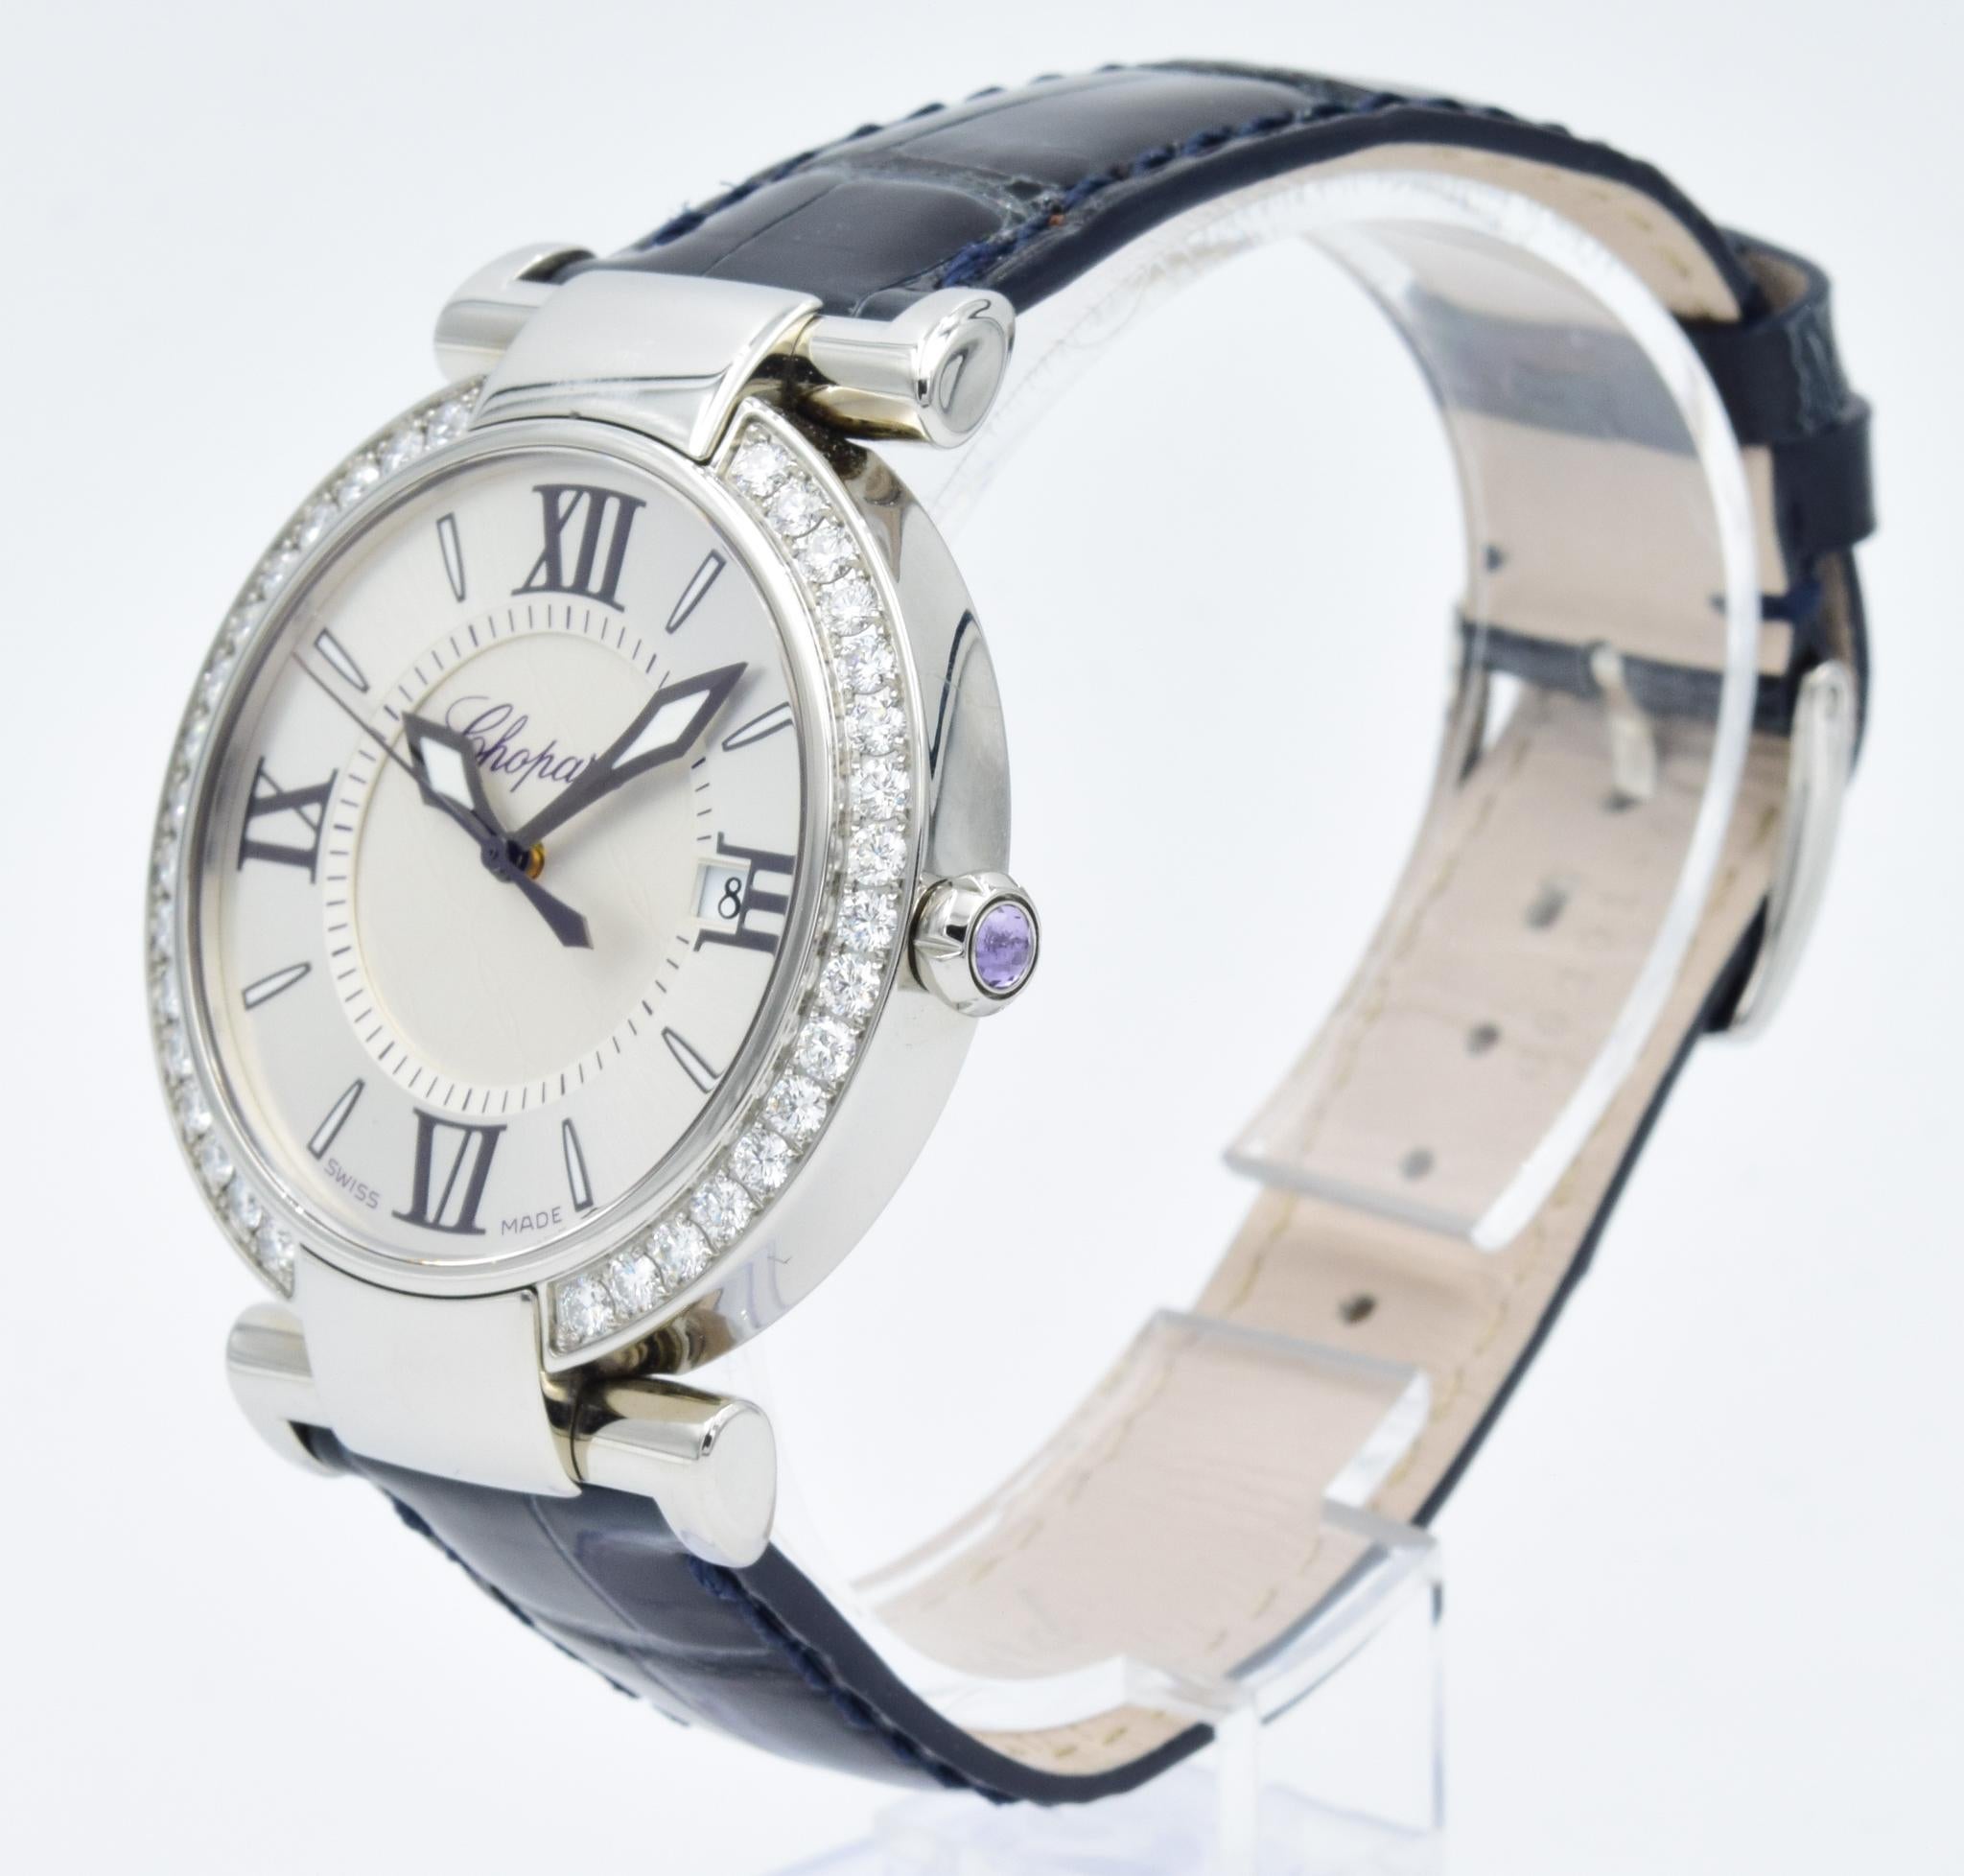 This Chopard Imperiale Ladies watch is brand new in our case and comes with the full box, papers, and factory warranty. Each year we choose a few items to post online for inventory turn purposes and this happens to be one of them.  This is a quartz